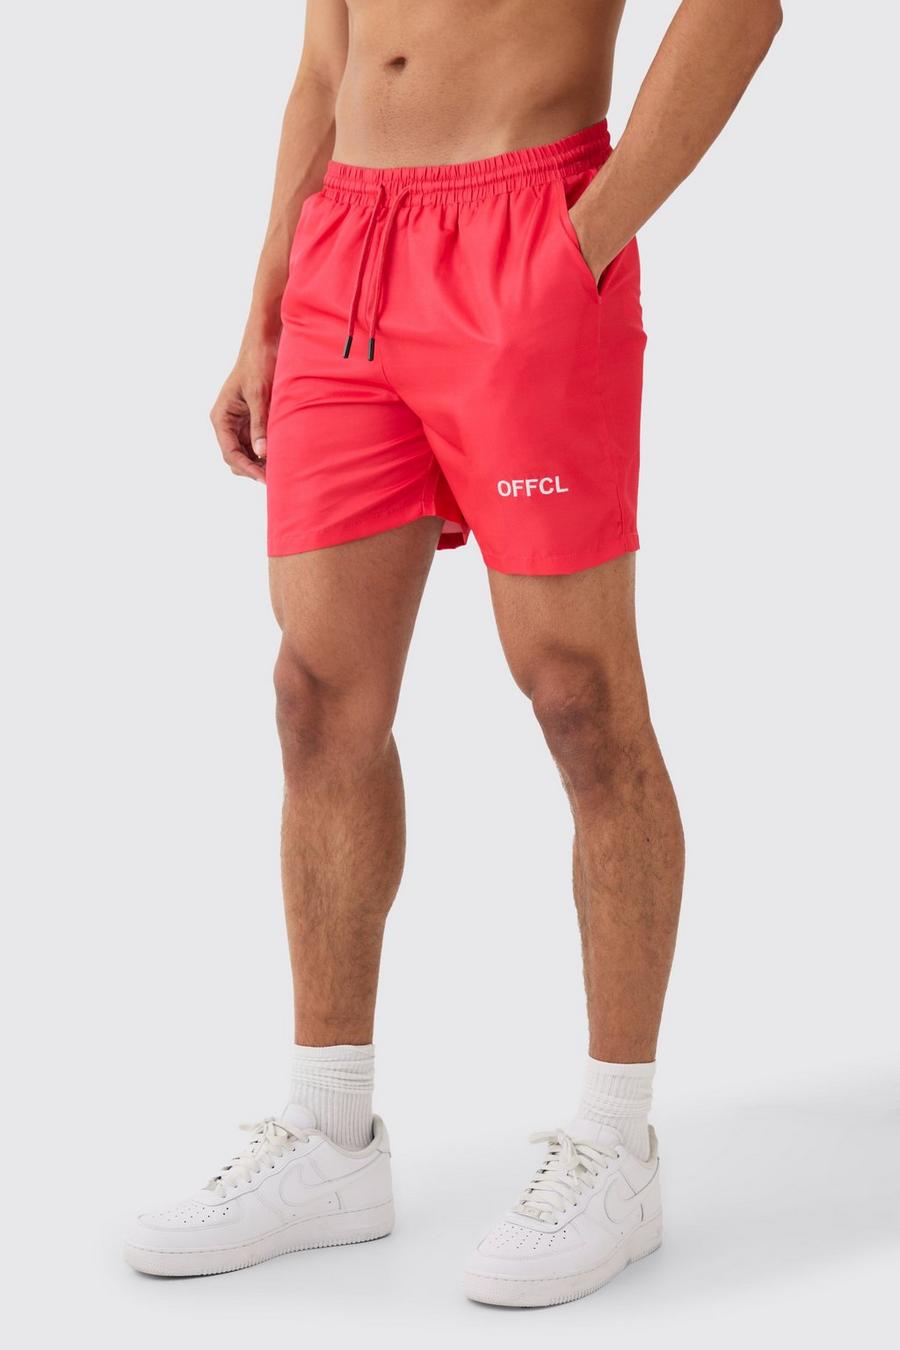 Berry Ofcl Mid Length Swim Short image number 1